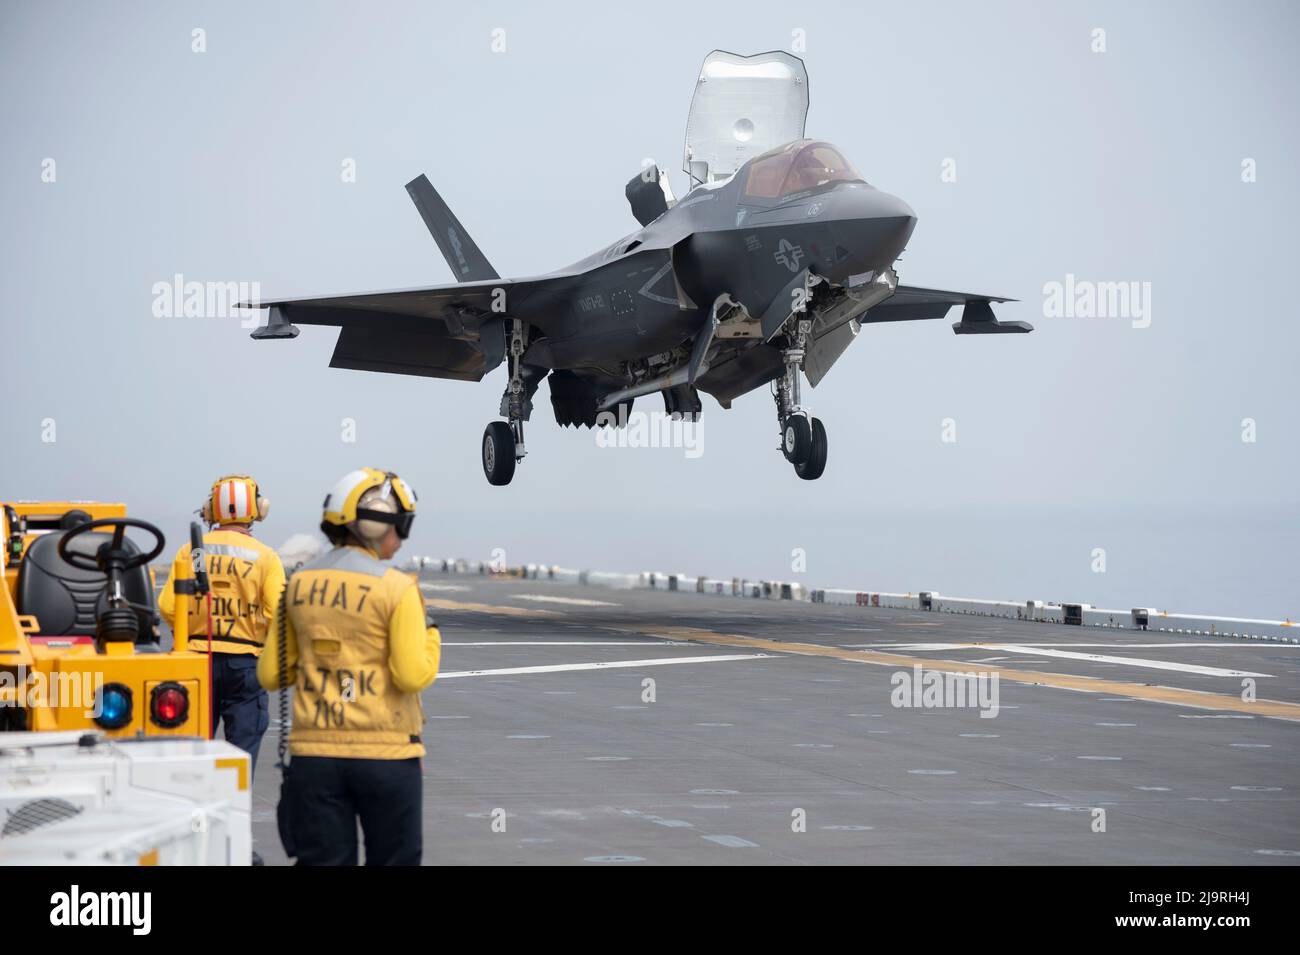 220524-N-XN177-1029 PACIFIC OCEAN (May 24, 2022) – An F-35B Lightning II aircraft assigned to Marine Fighter Attack Squadron (VMFA) 121 lands aboard amphibious assault carrier USS Tripoli (LHA 7), May 24, 2022. Tripoli is conducting routine operations in U.S. 7th Fleet. (U.S. Navy photo by Mass Communication Specialist 1st Class Peter Burghart Stock Photo